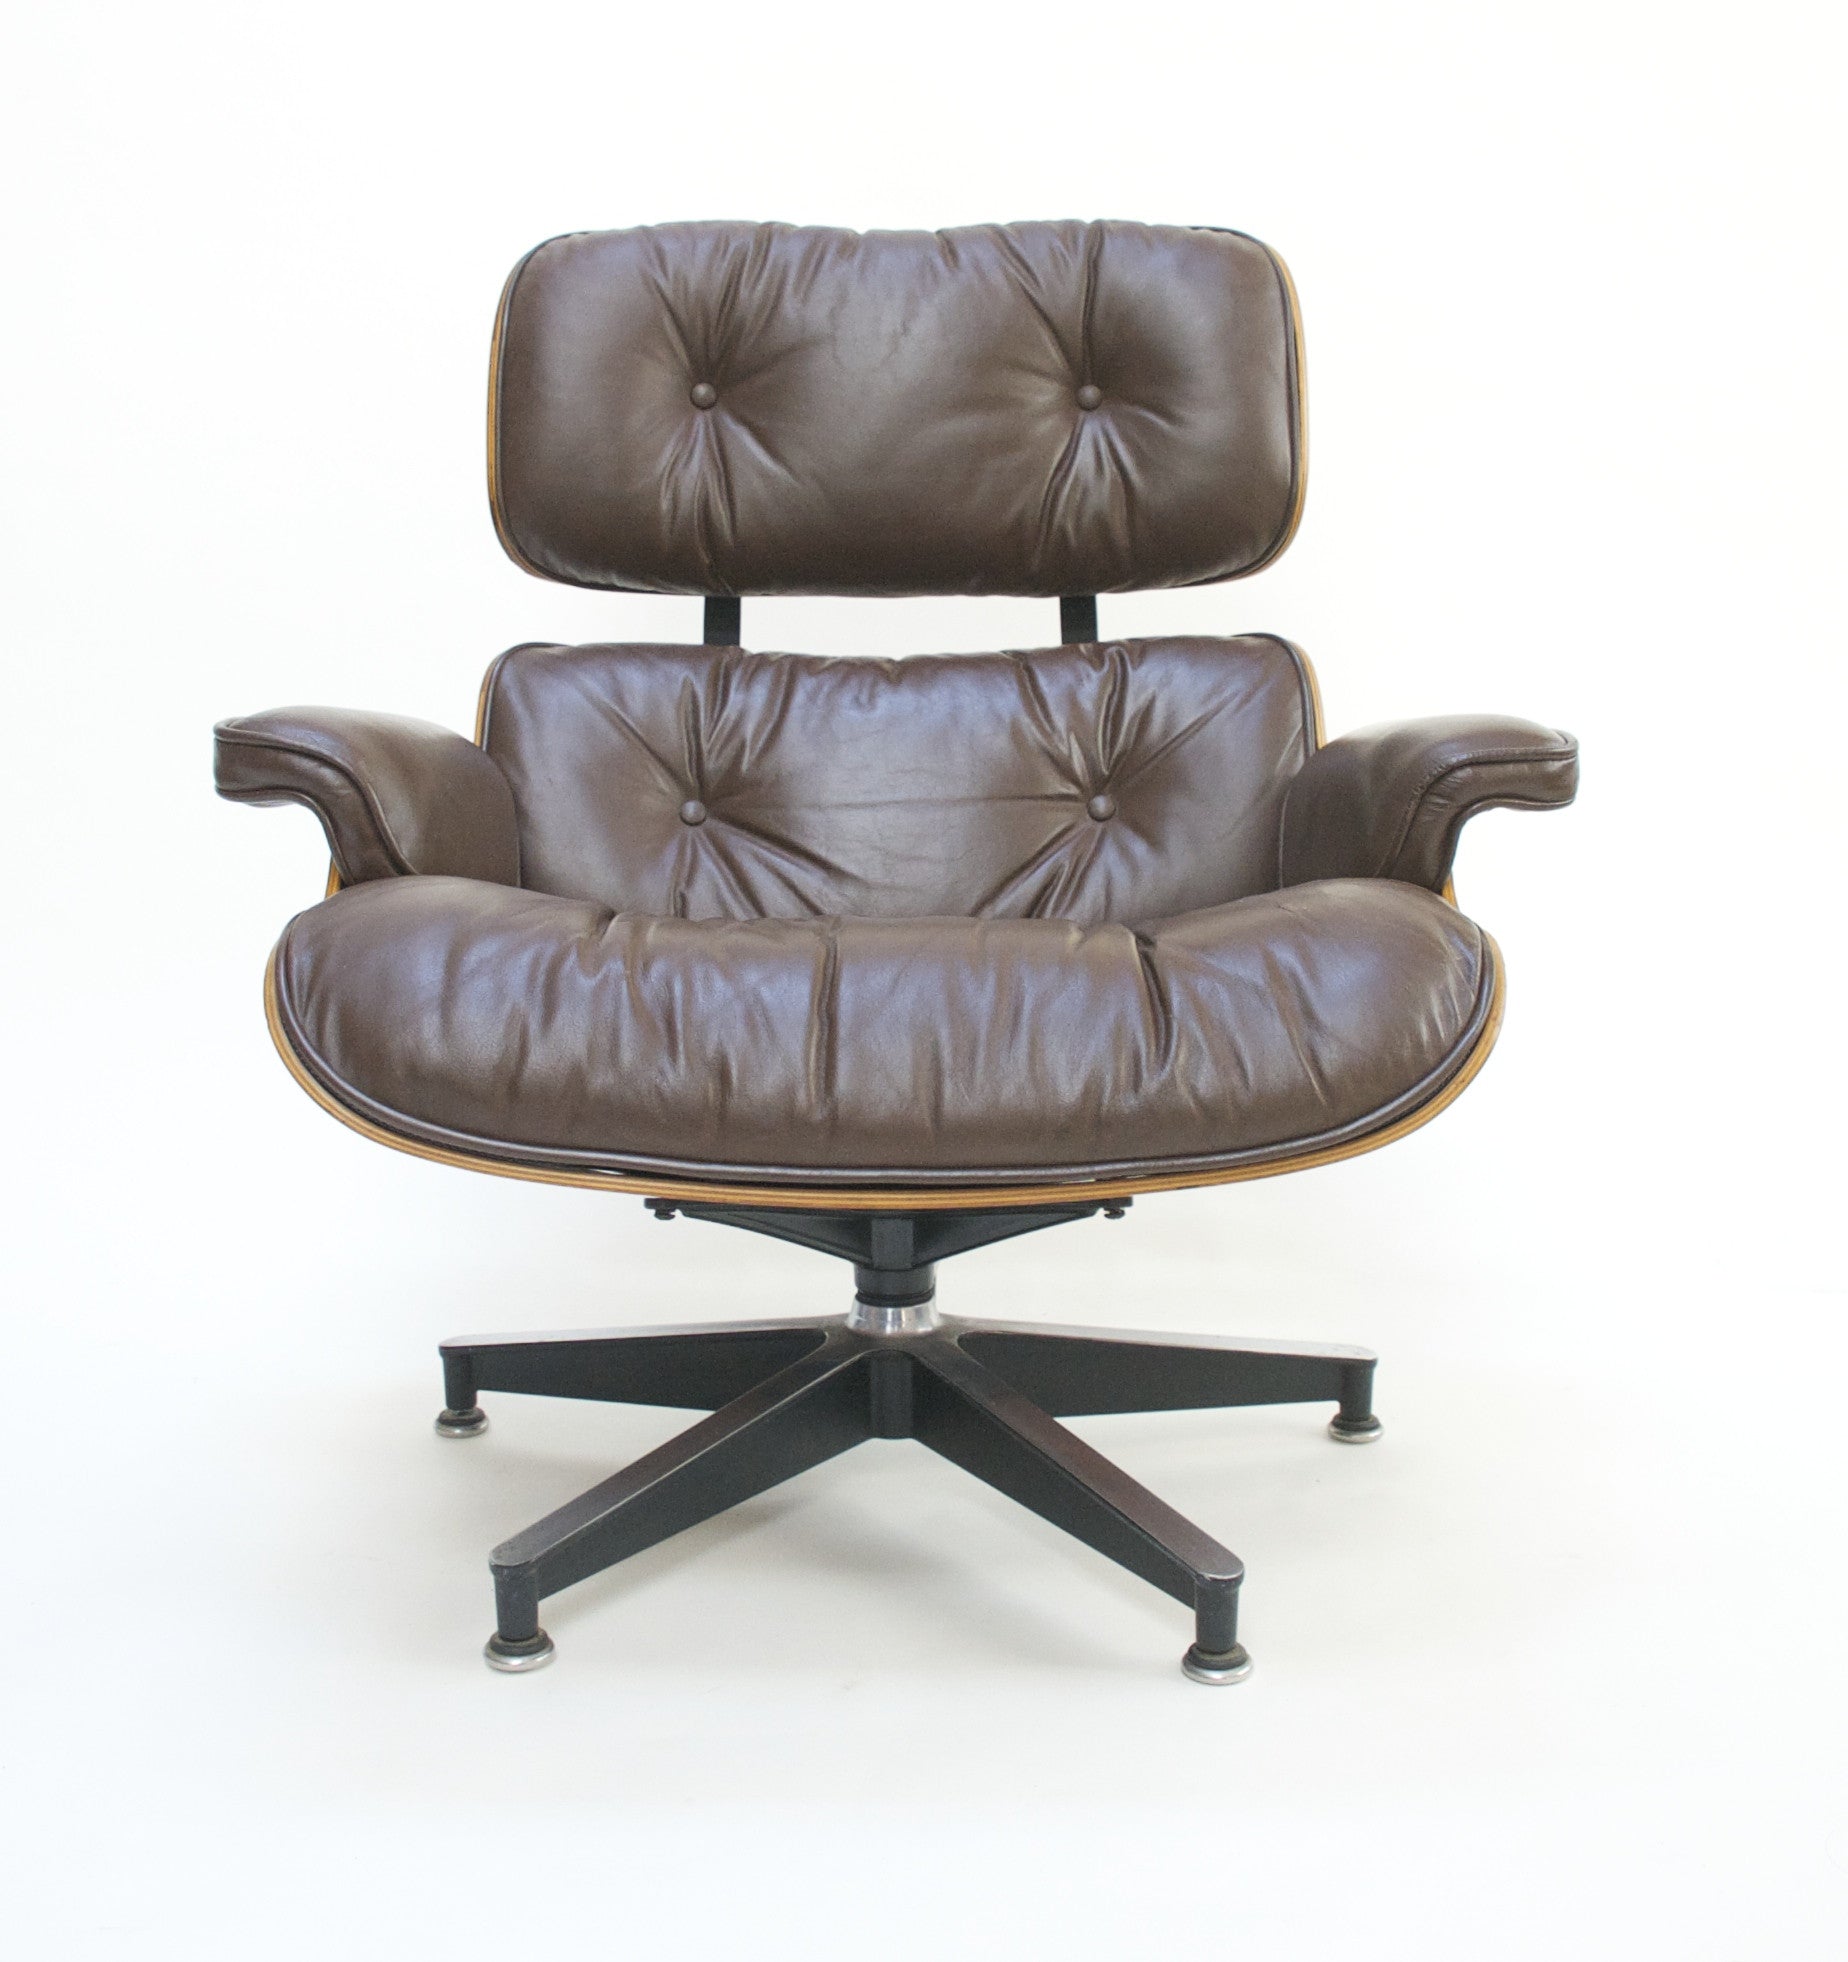 SOLD 1970's Herman Miller Eames Lounge Chair & Ottoman Rosewood 670 671 Brown